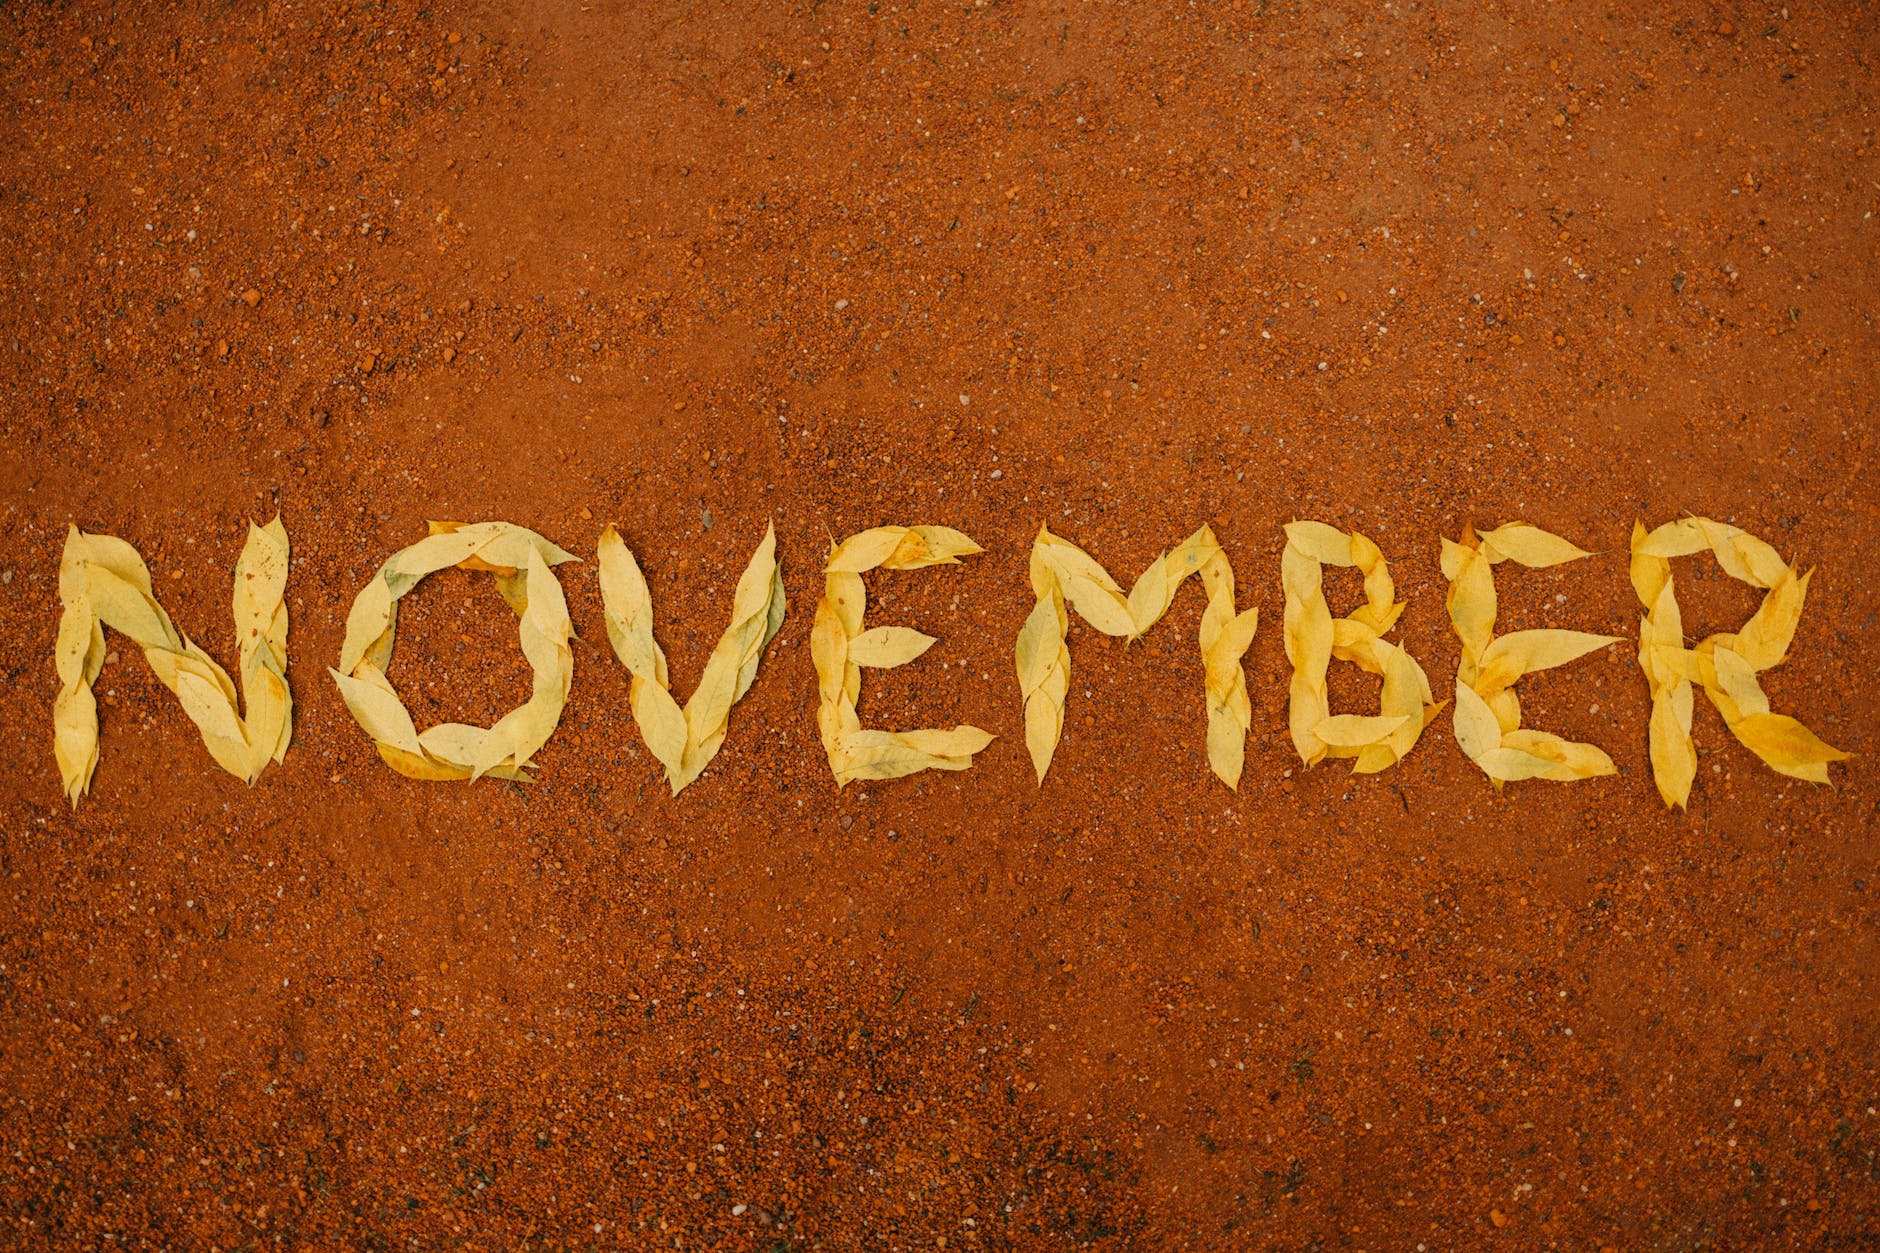 Peace and Battle - image shows the word November spelled out with leaves on a brown dirt surface.